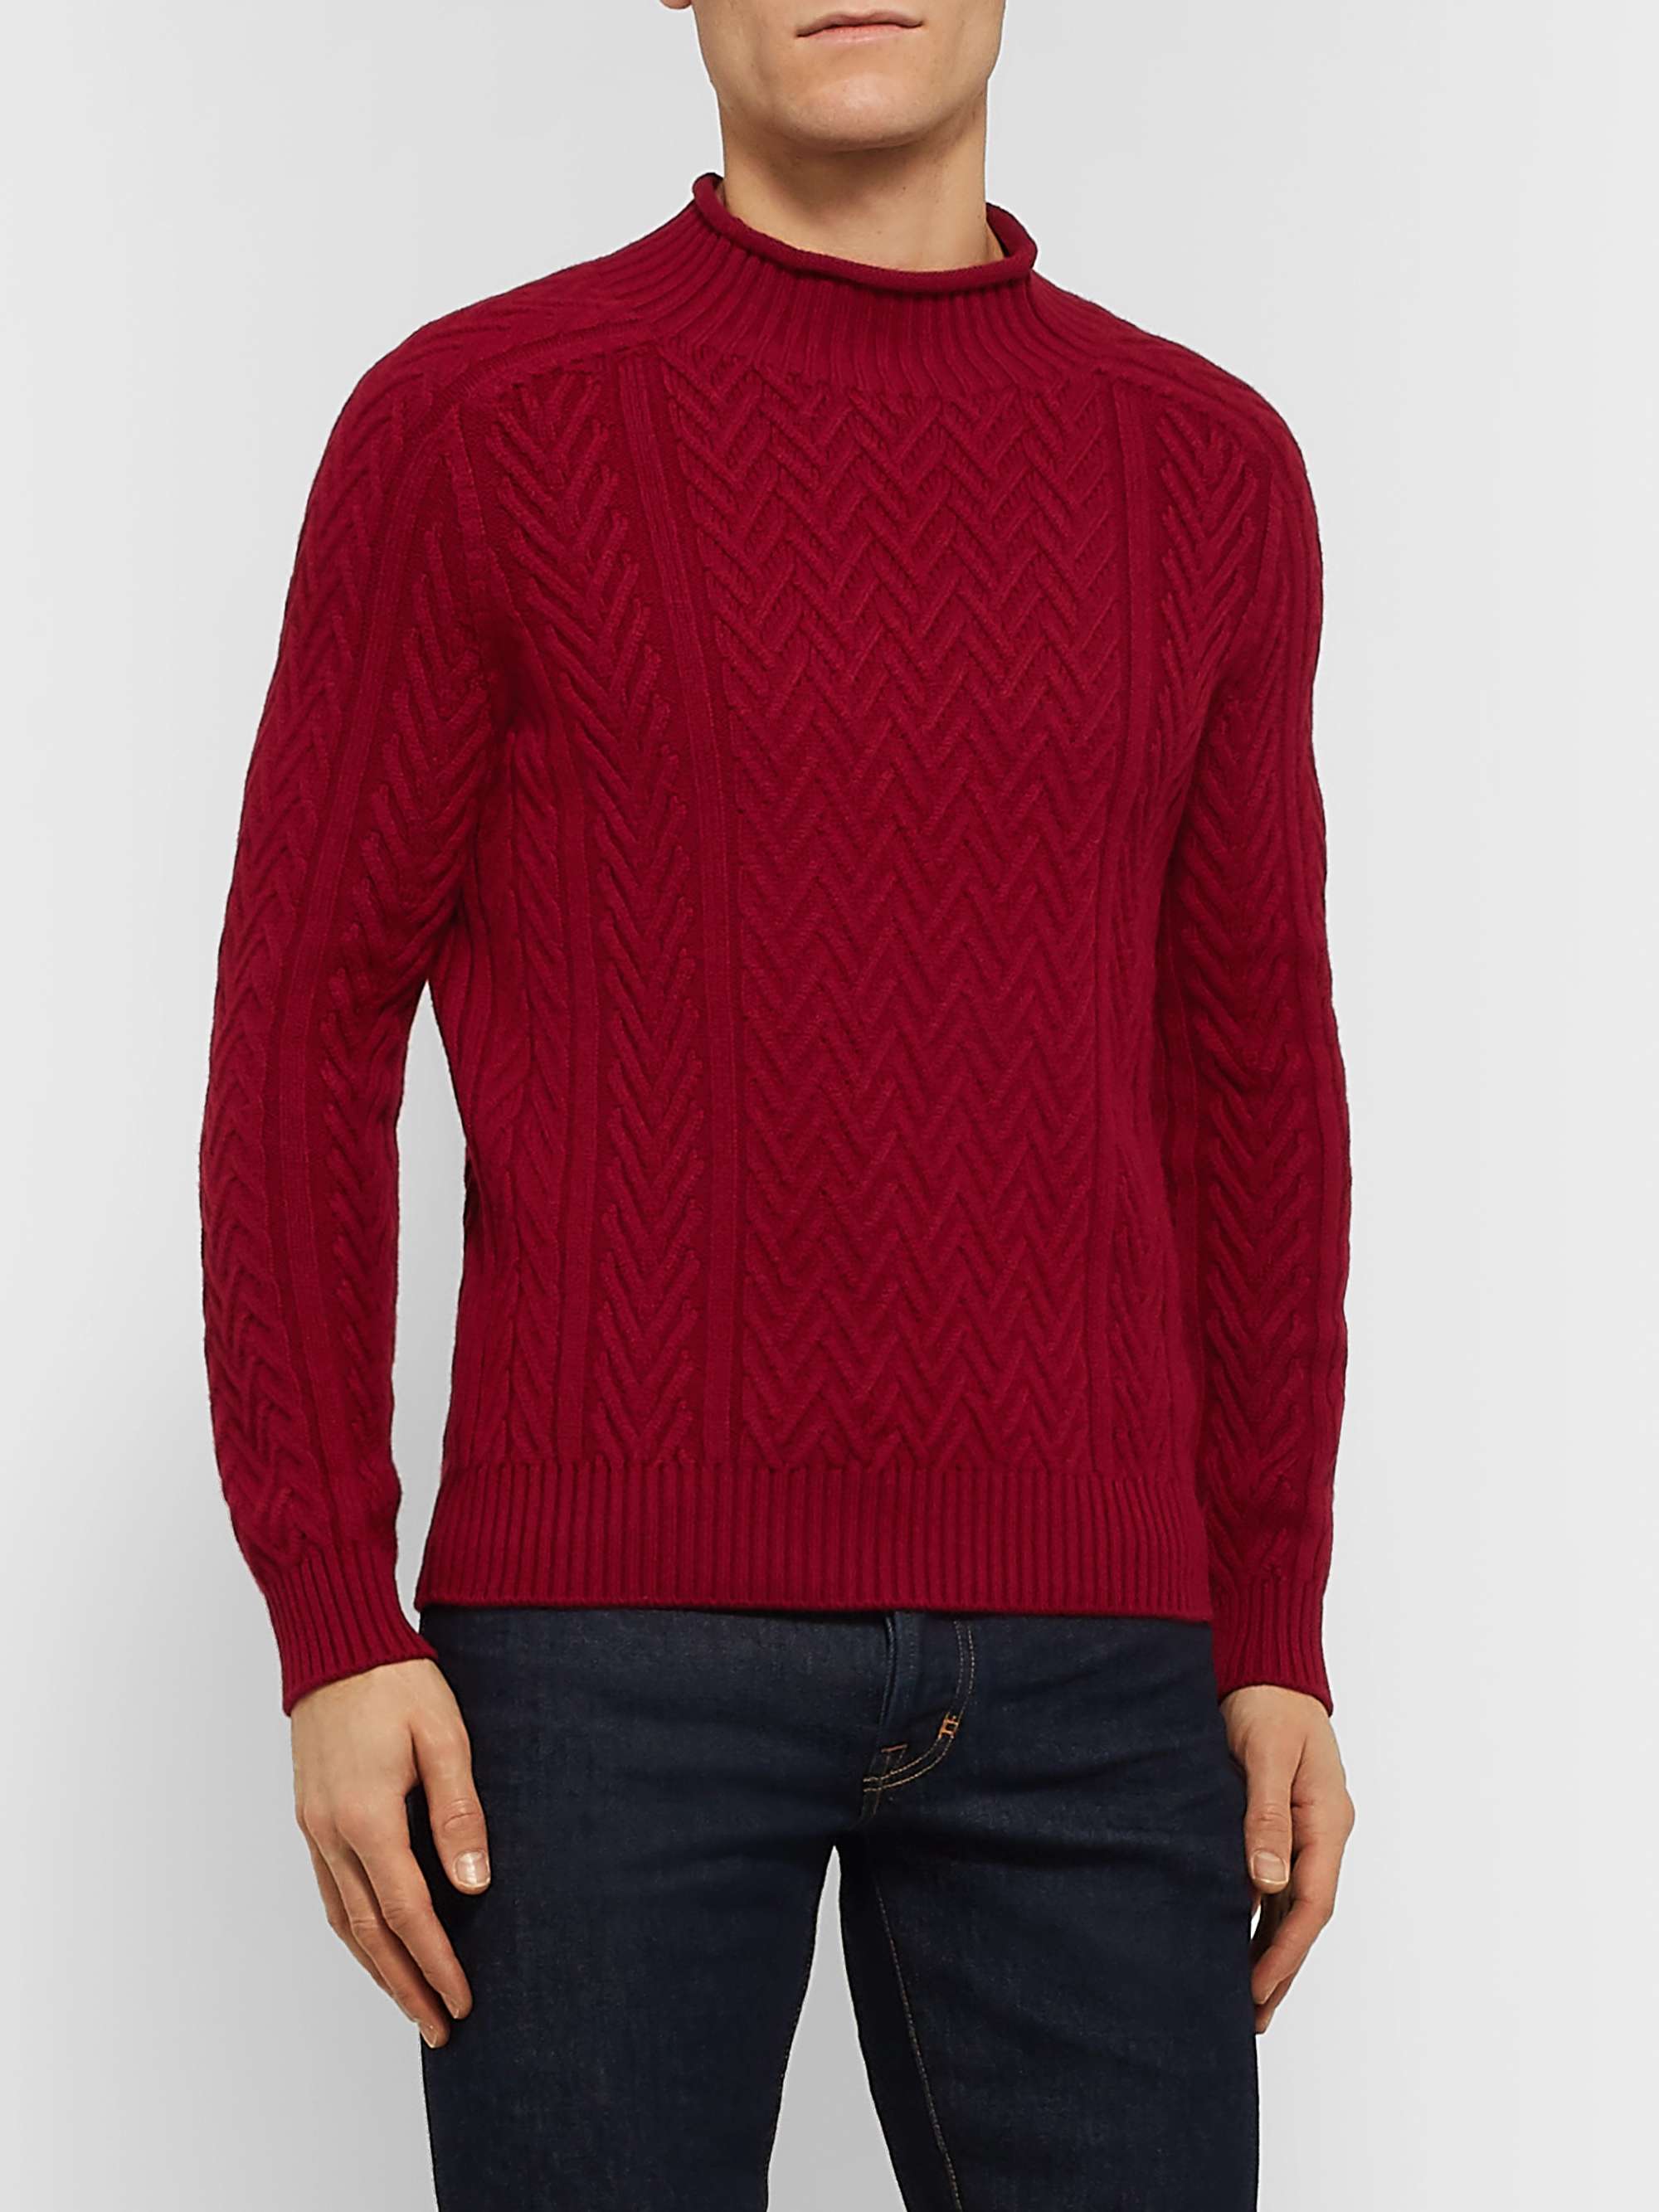 LORO PIANA Slim-Fit Cable-Knit Baby Cashmere Mock-Neck Sweater for Men ...